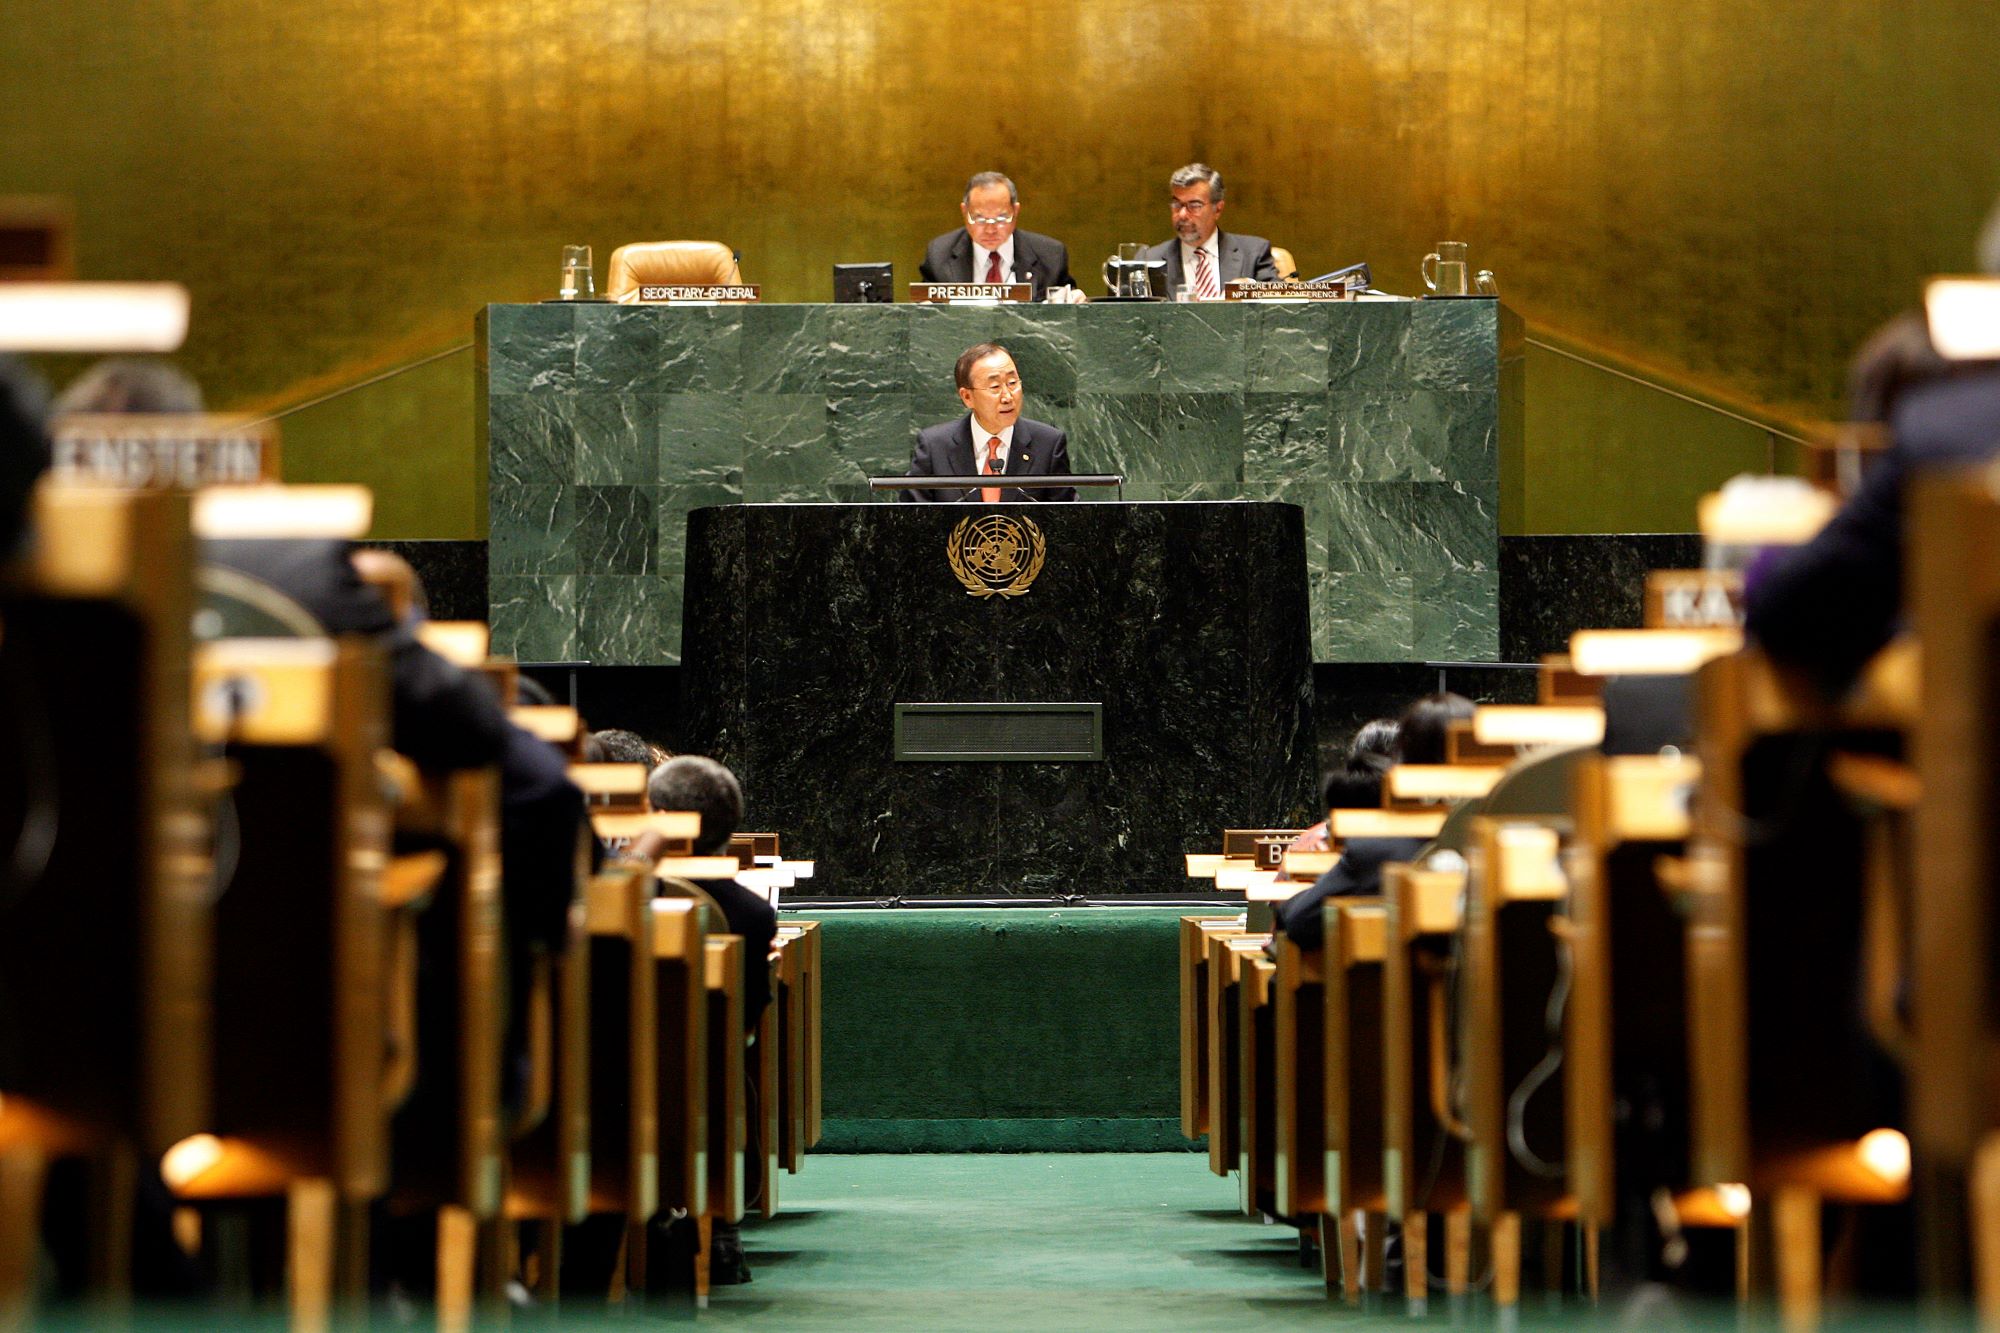 Photo of United Nations Secretary-General Ban Ki-moon speaking at the 2010 High-level Review Conference of the Parties to the Treaty on the Non-Proliferation of Nuclear Weapons (NPT). United Nations photo by Mark Garten.